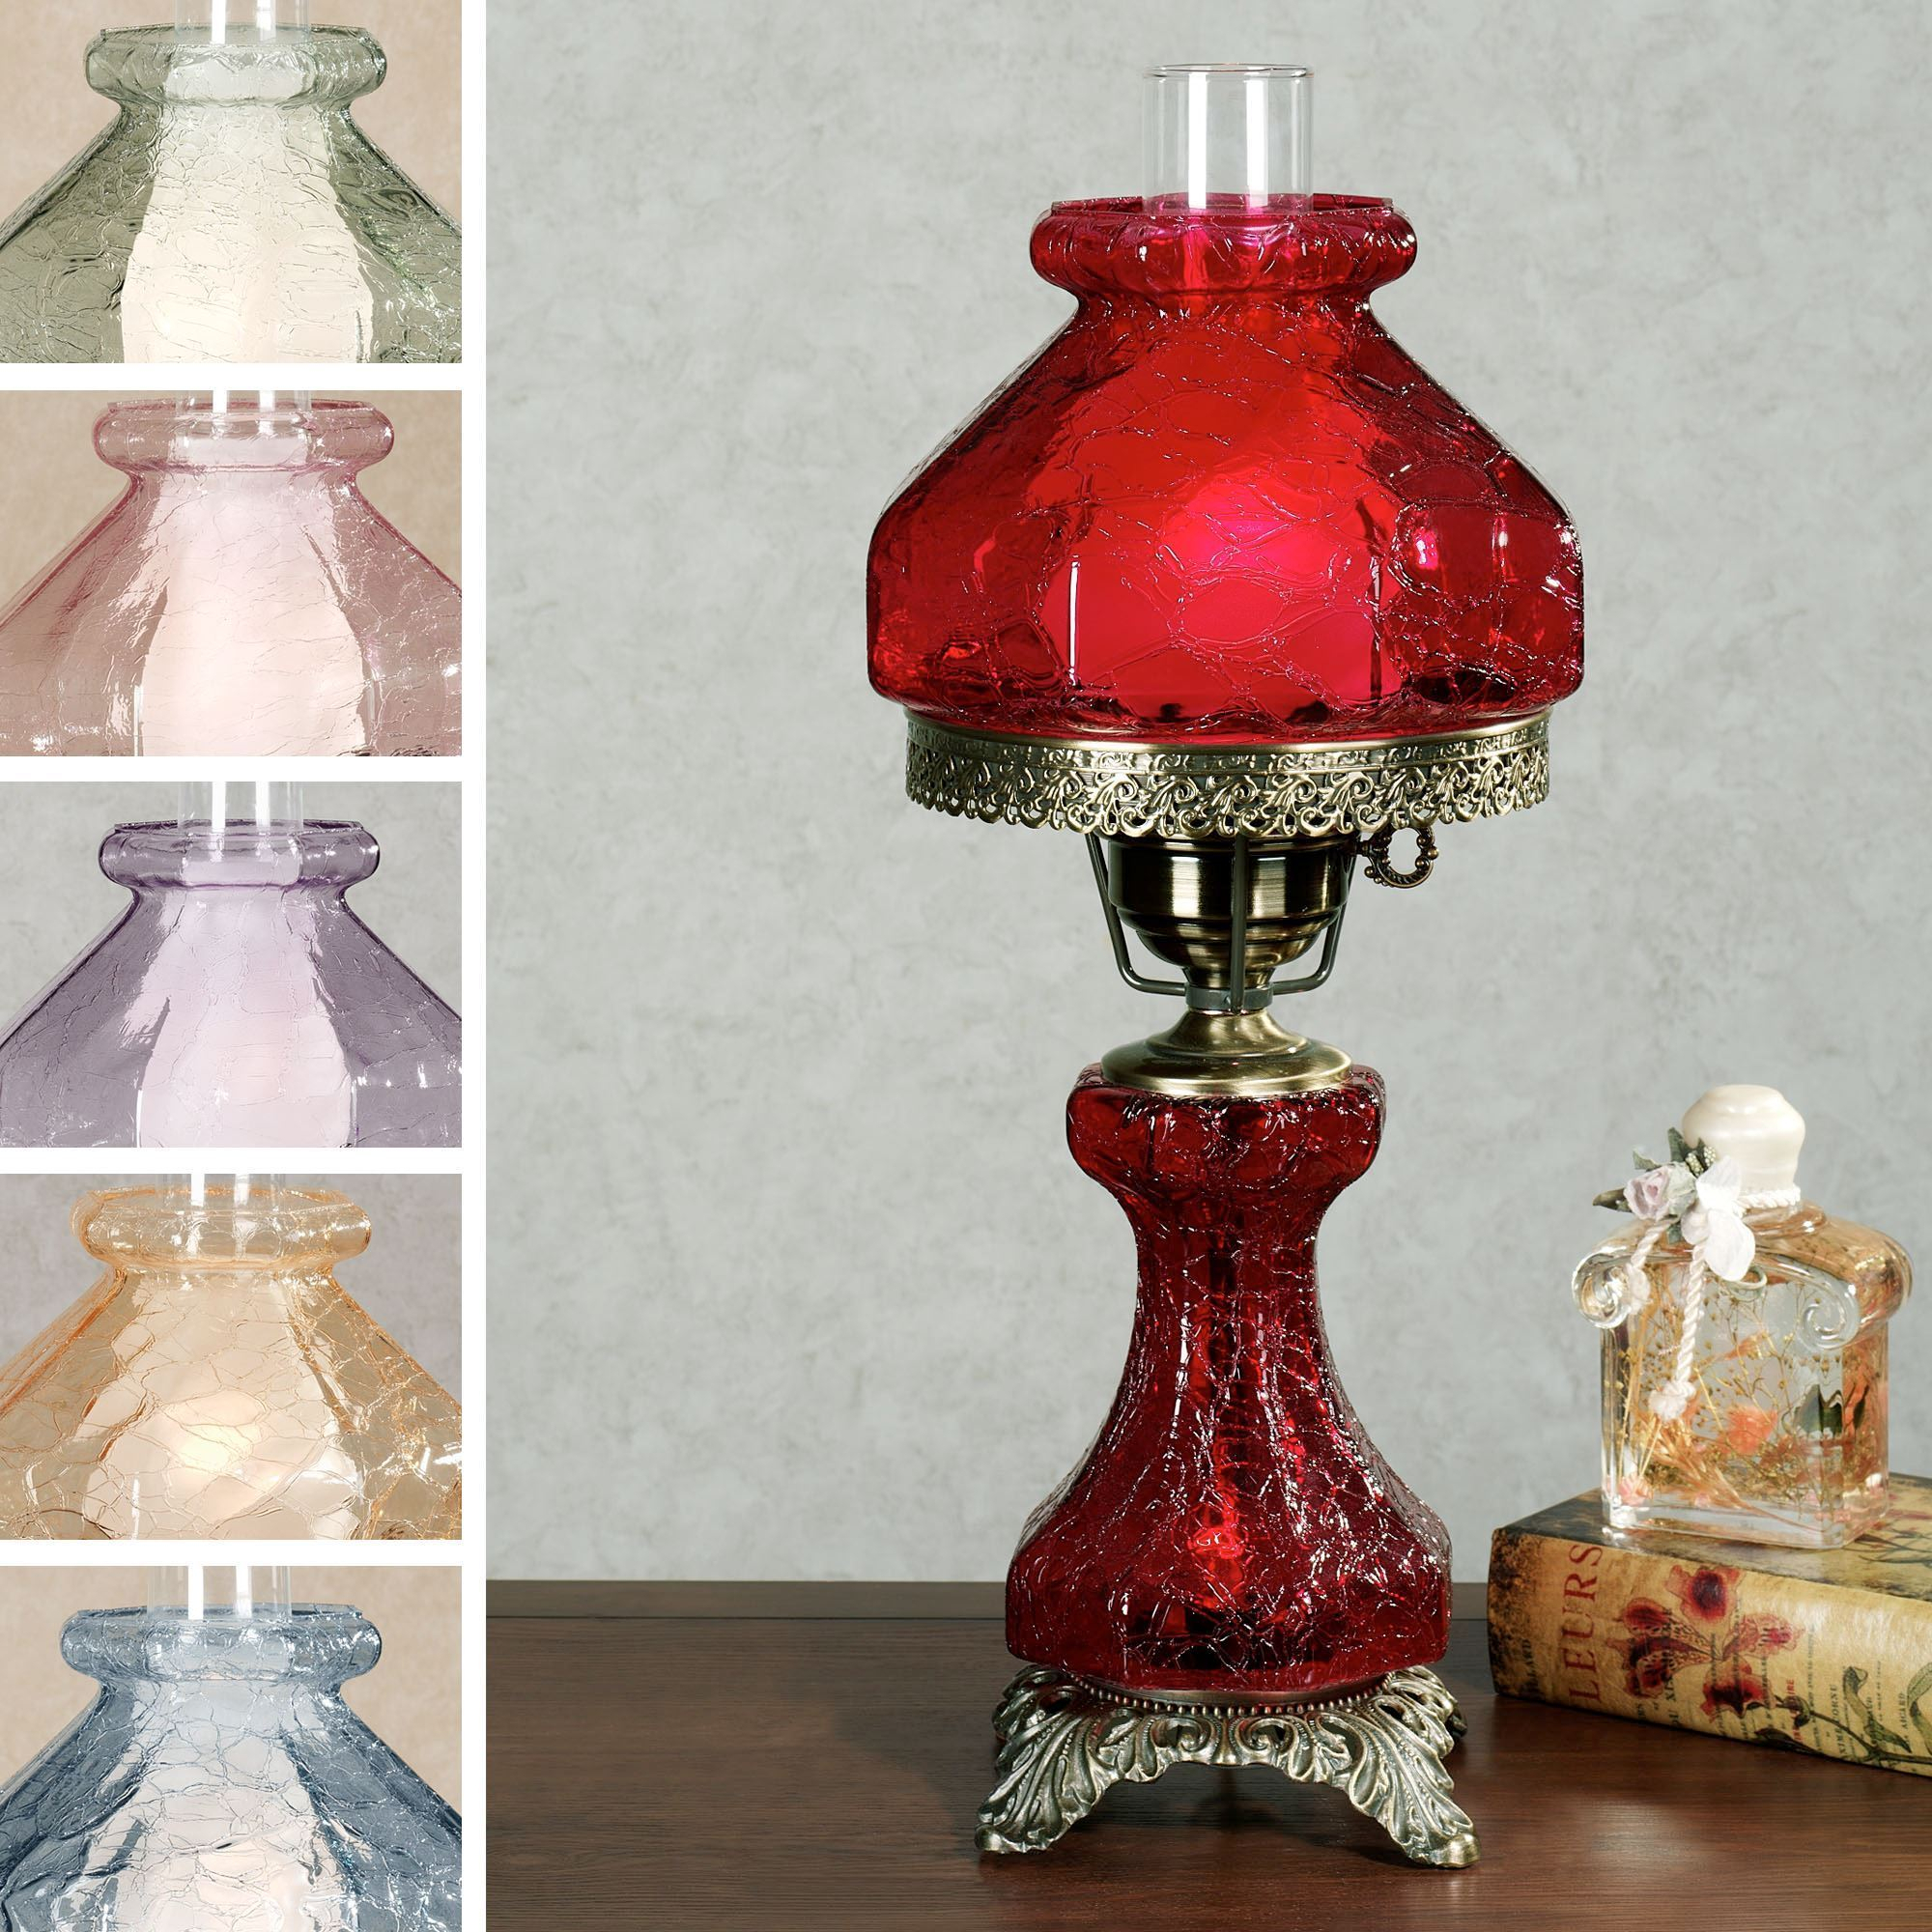 small brayleigh handblown glass accent lamp for table red kidney shaped top uttermost furniture end tables runner set kitchen sets ikea kids white desk interior door threshold